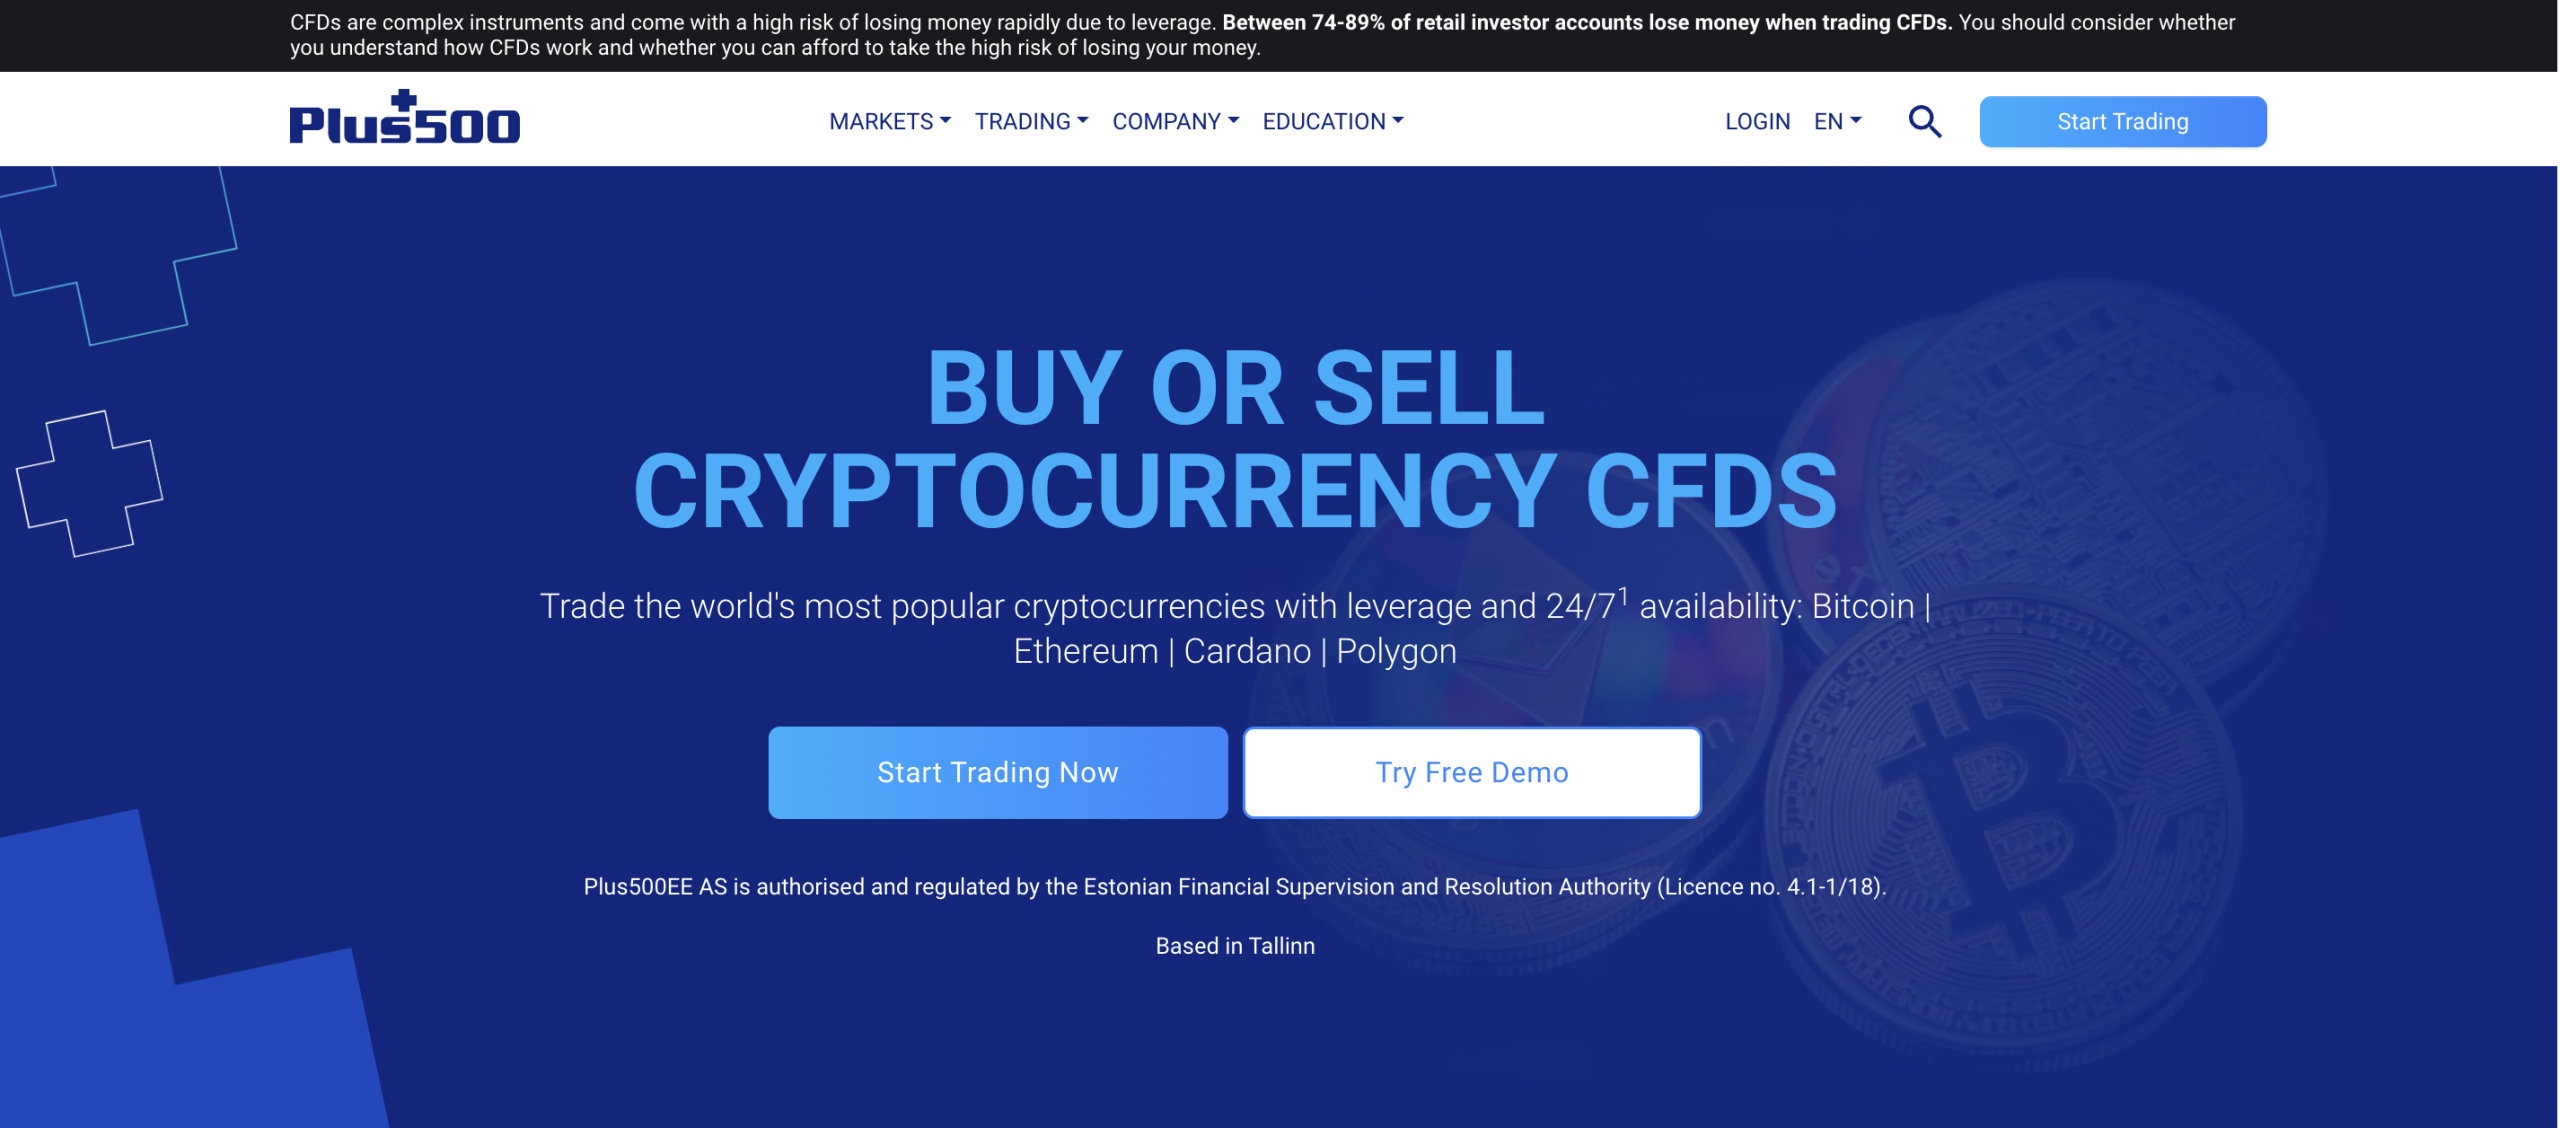 Plus500 Crypto CFD Trading Homepage